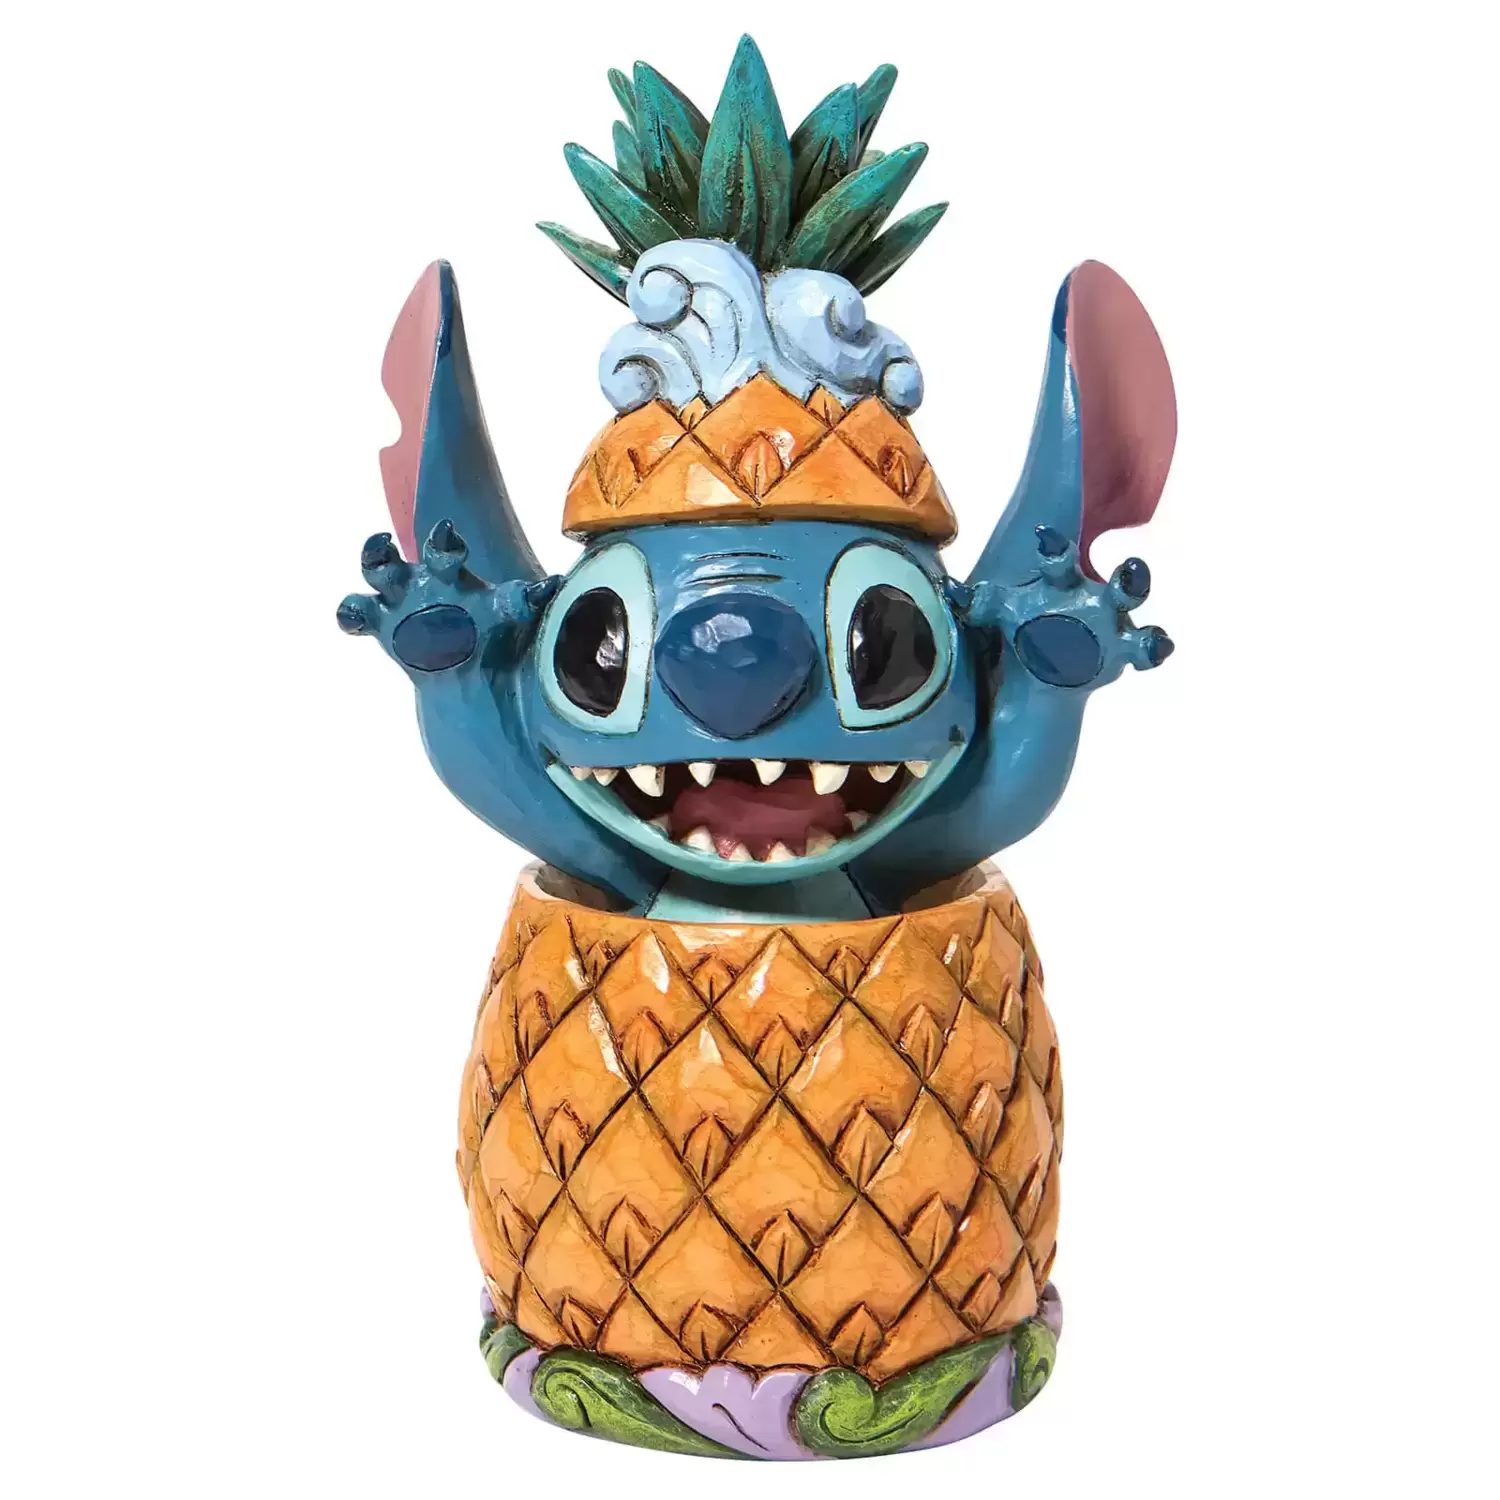 Disney Traditions by Jim Shore - Stitch In A Pineapple Figurine